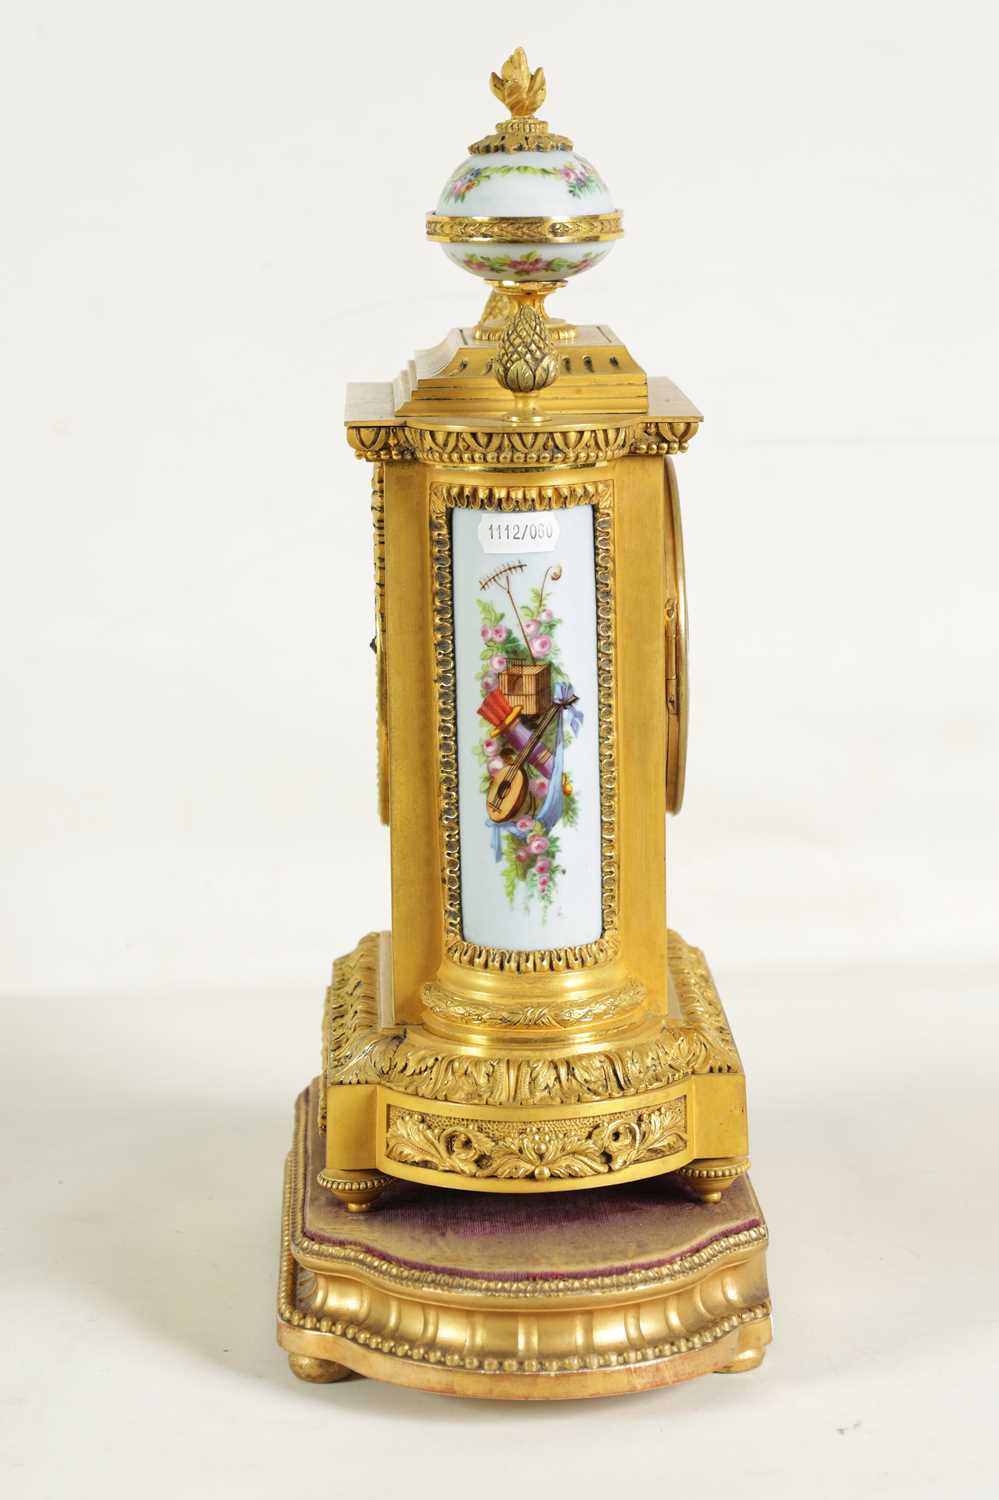 A GOOD QUALITY LATE 19TH CENTURY FRENCH ORMOLU AND PORCELAIN PANELLED MANTEL CLOCK - Image 11 of 11